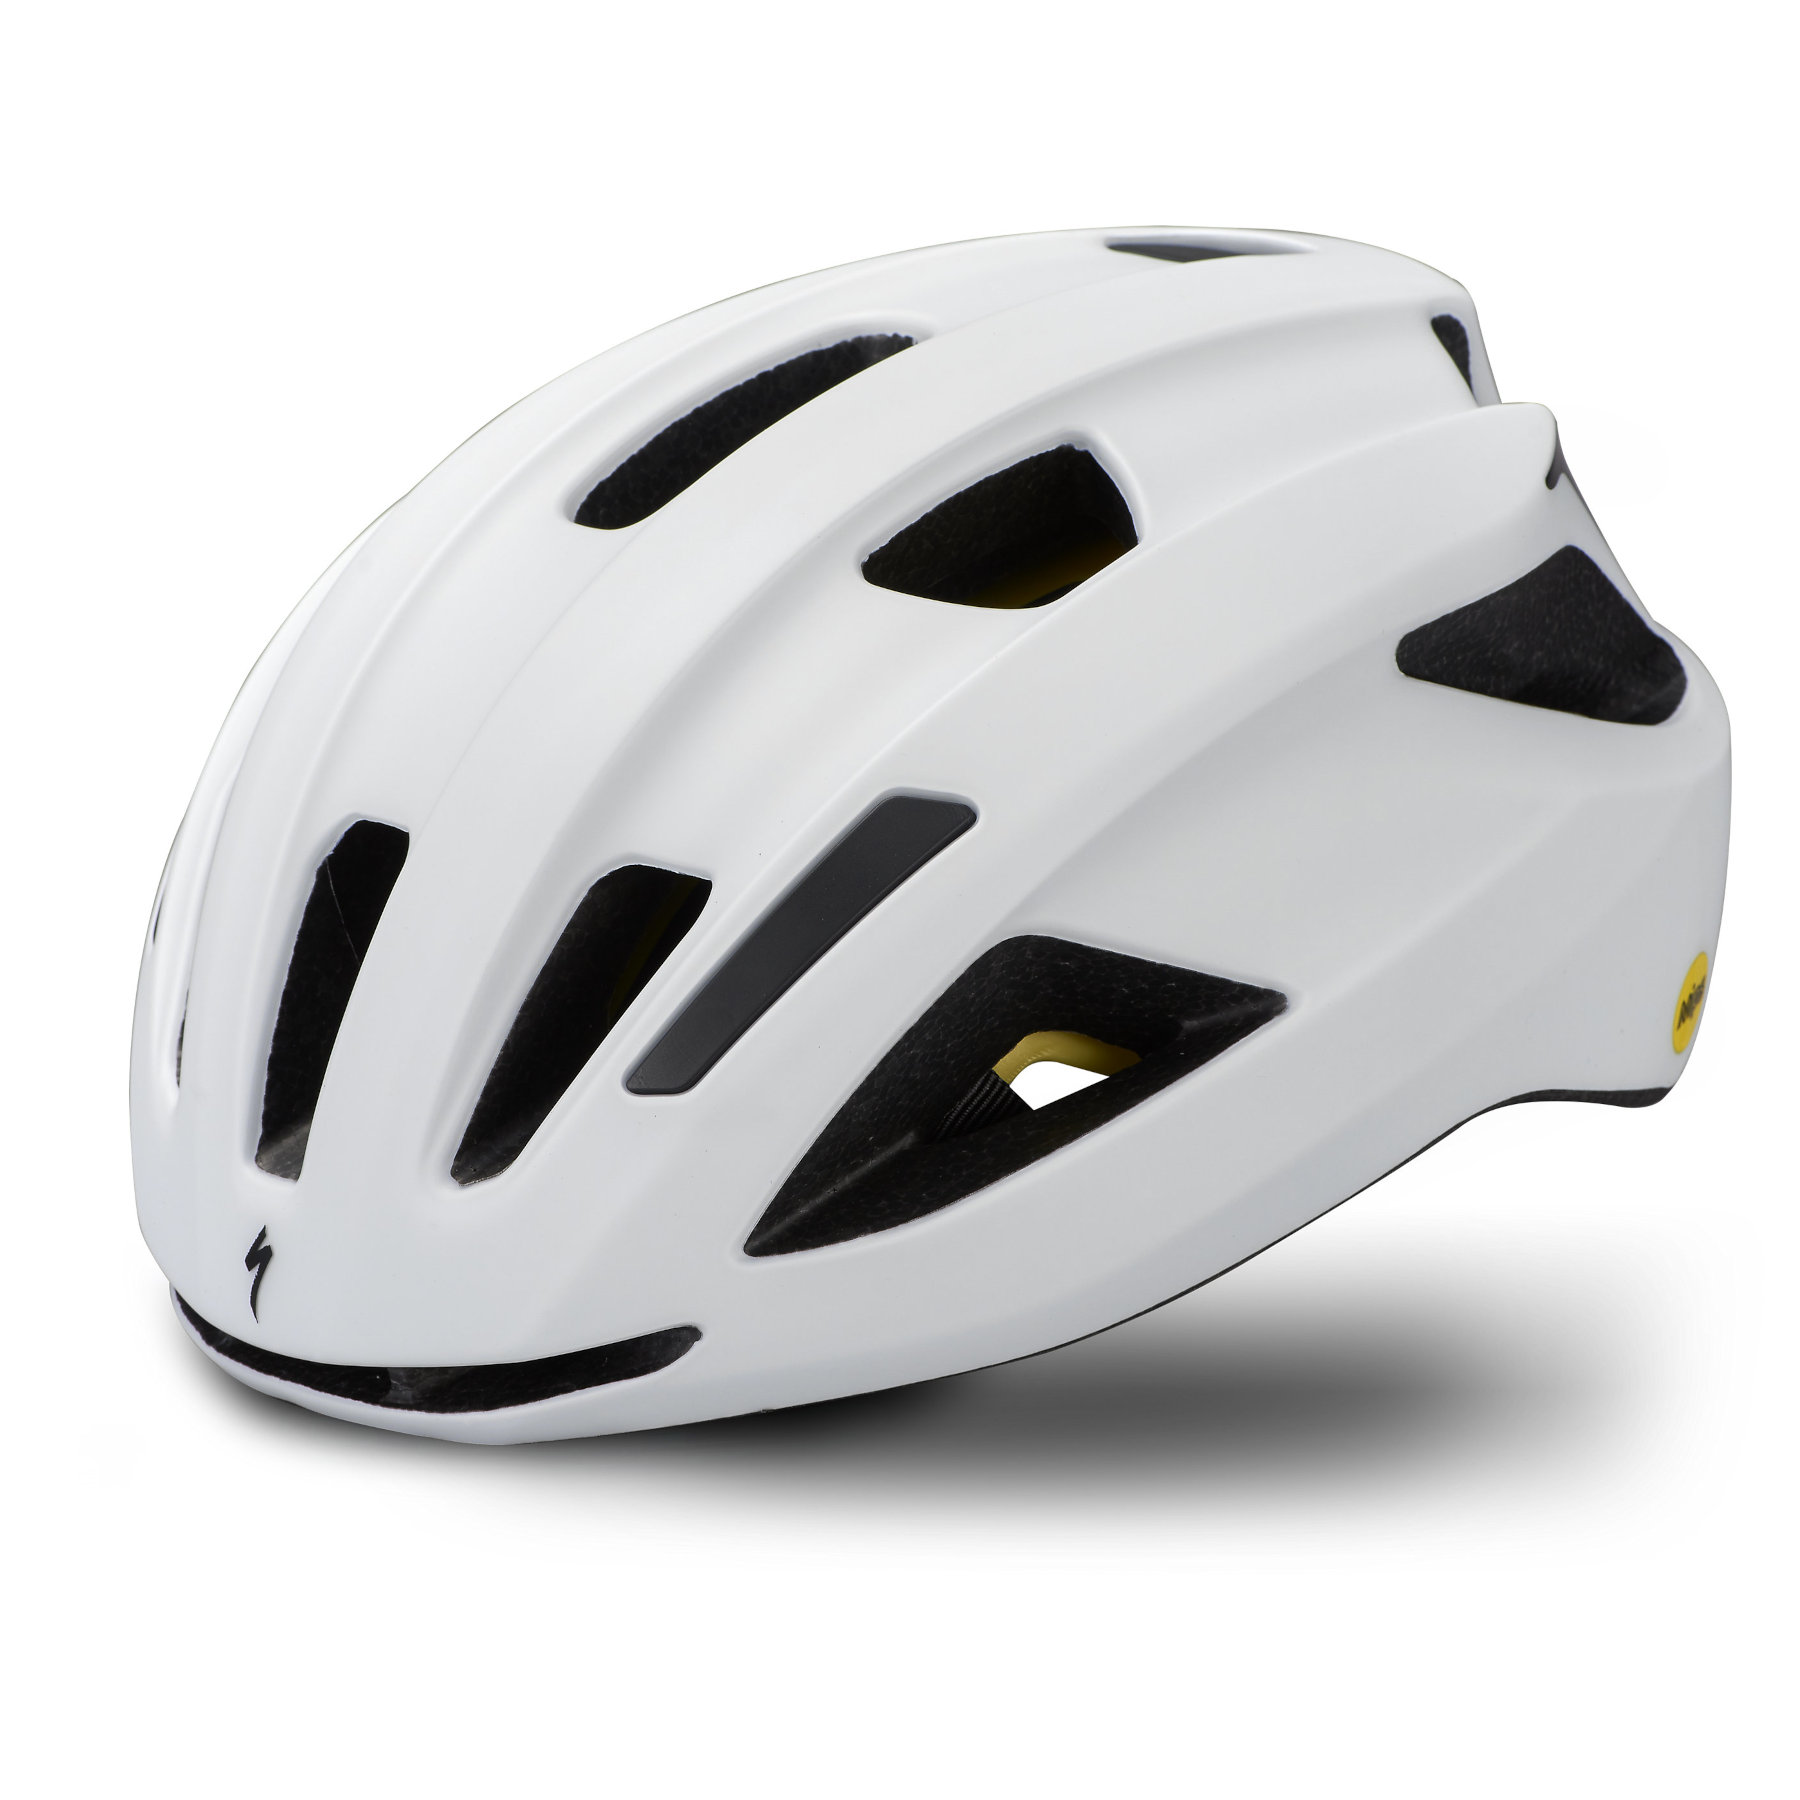 Picture of Specialized Align II MIPS Helmet - Satin White